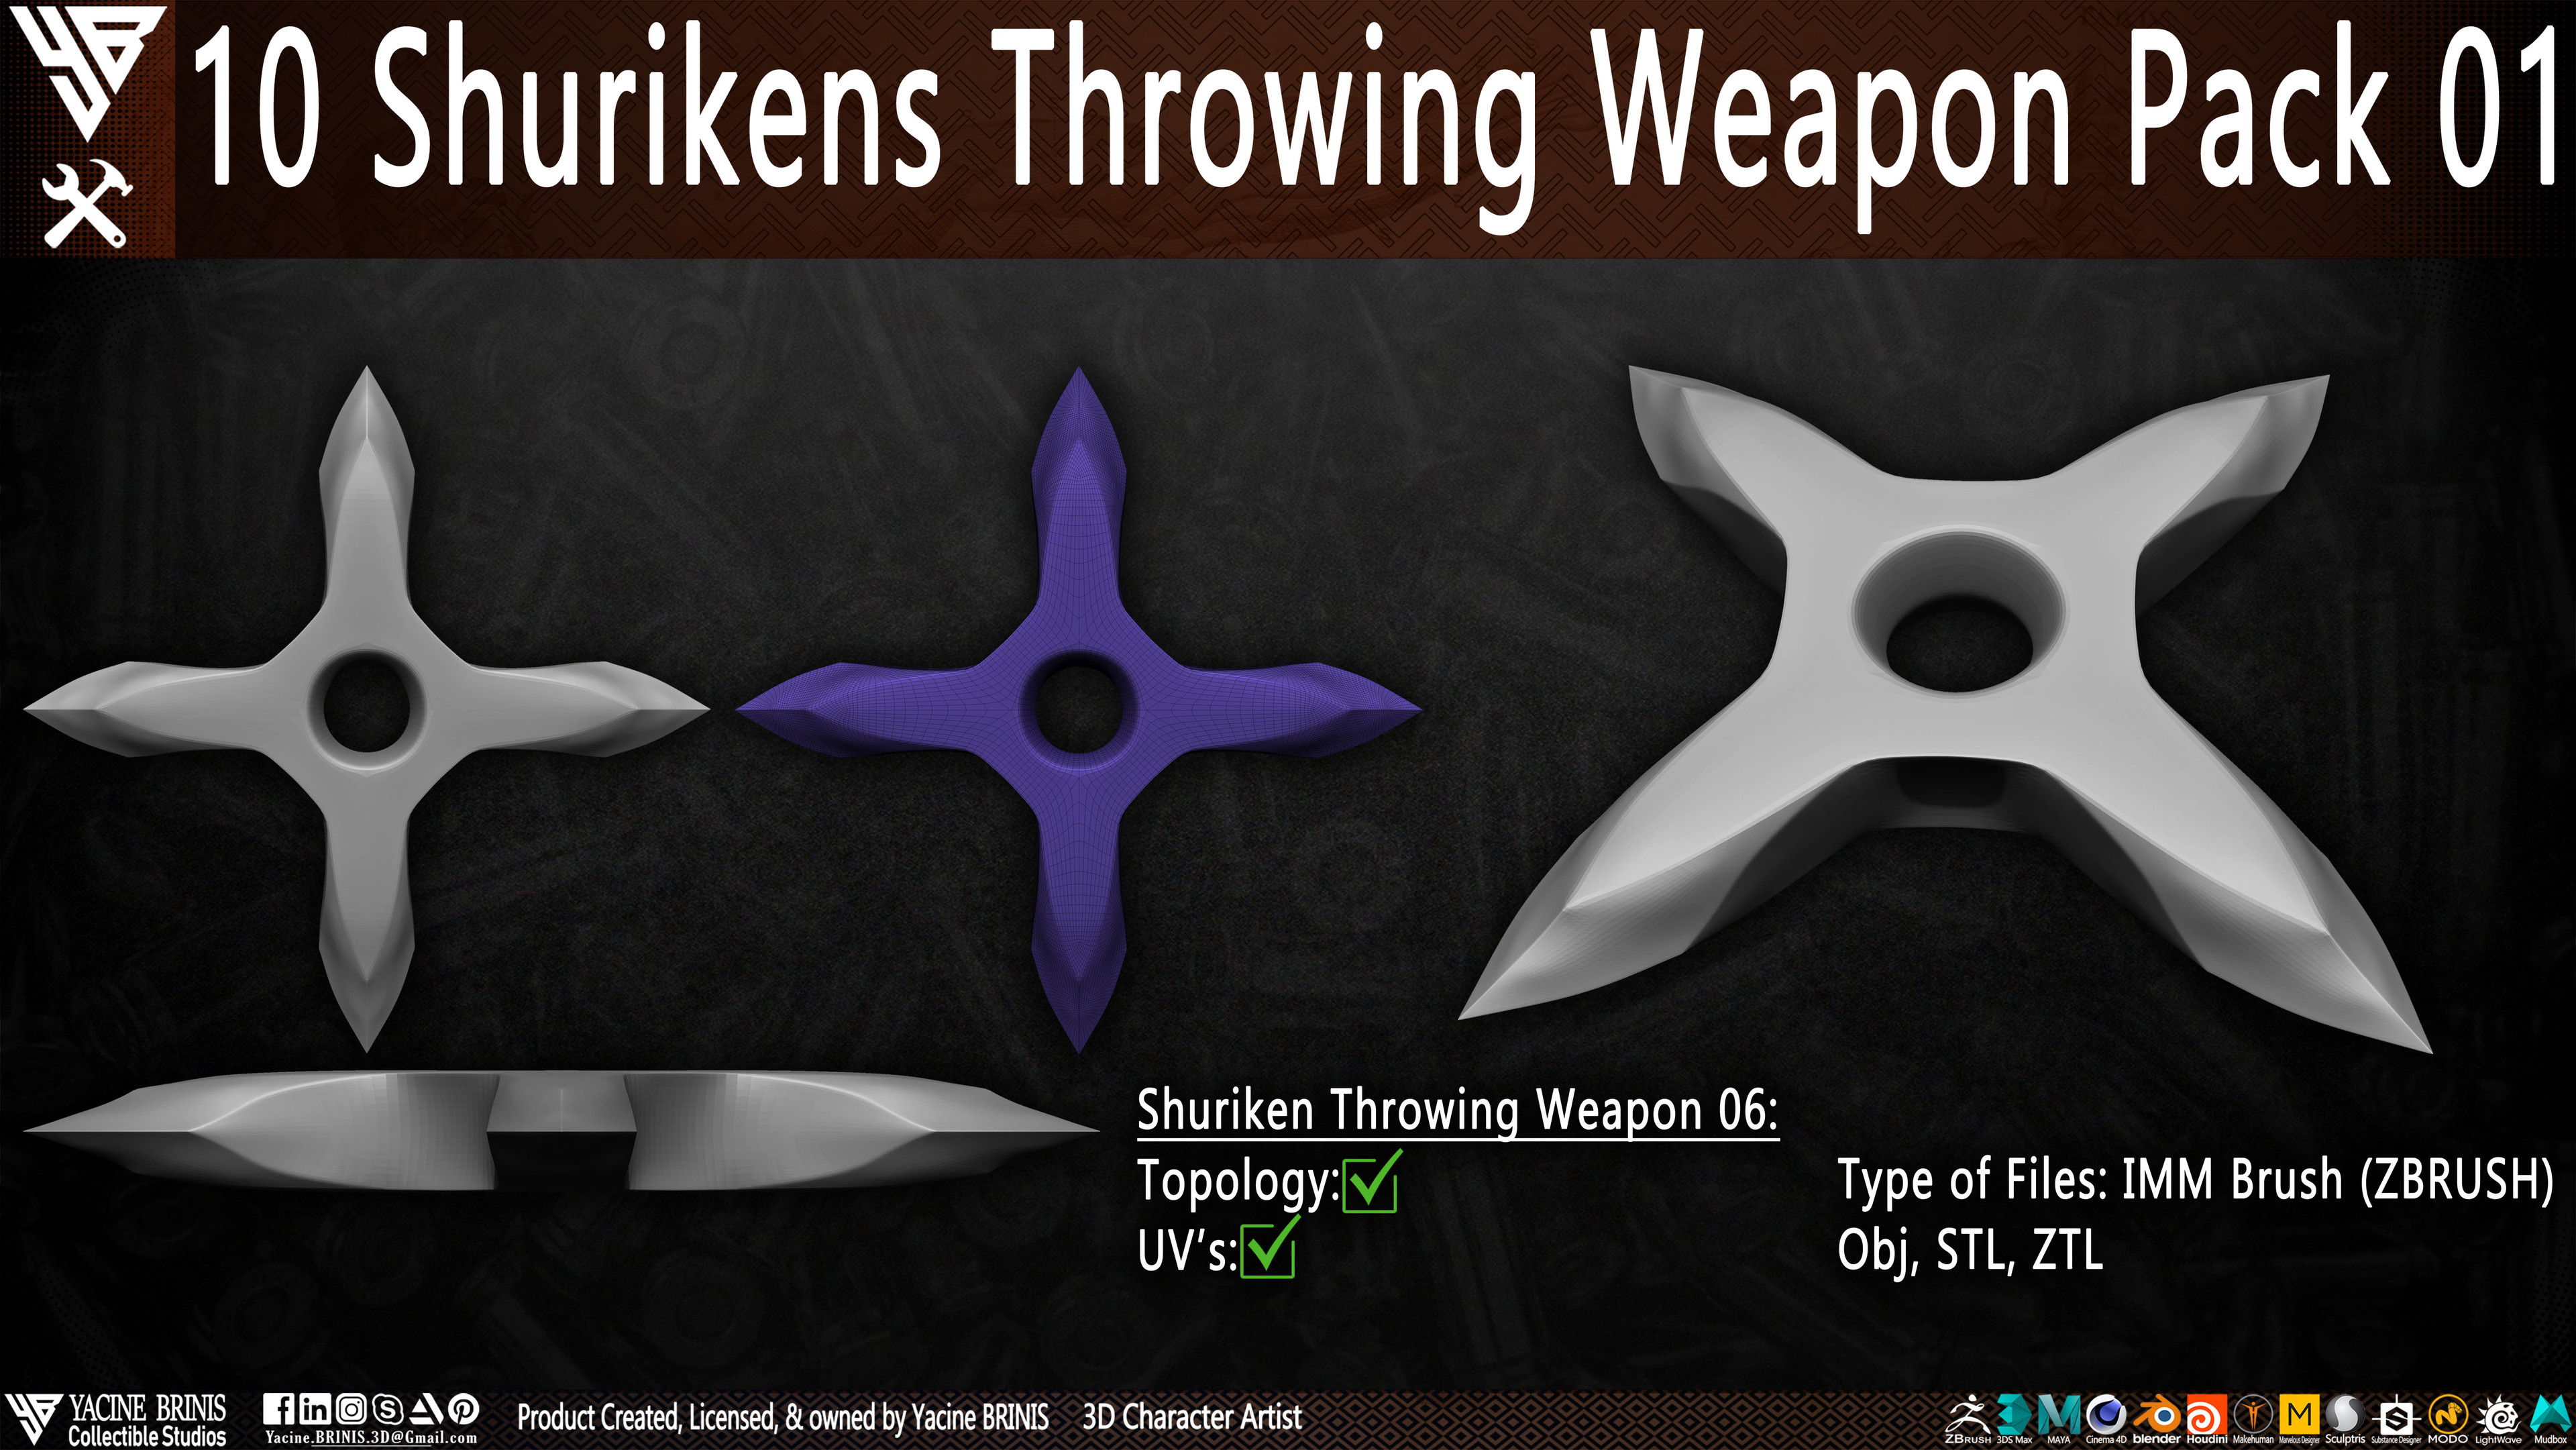 10 Shurikens Throwing Weapon Pack 01 sculpted by Yacine BRINIS Set 10